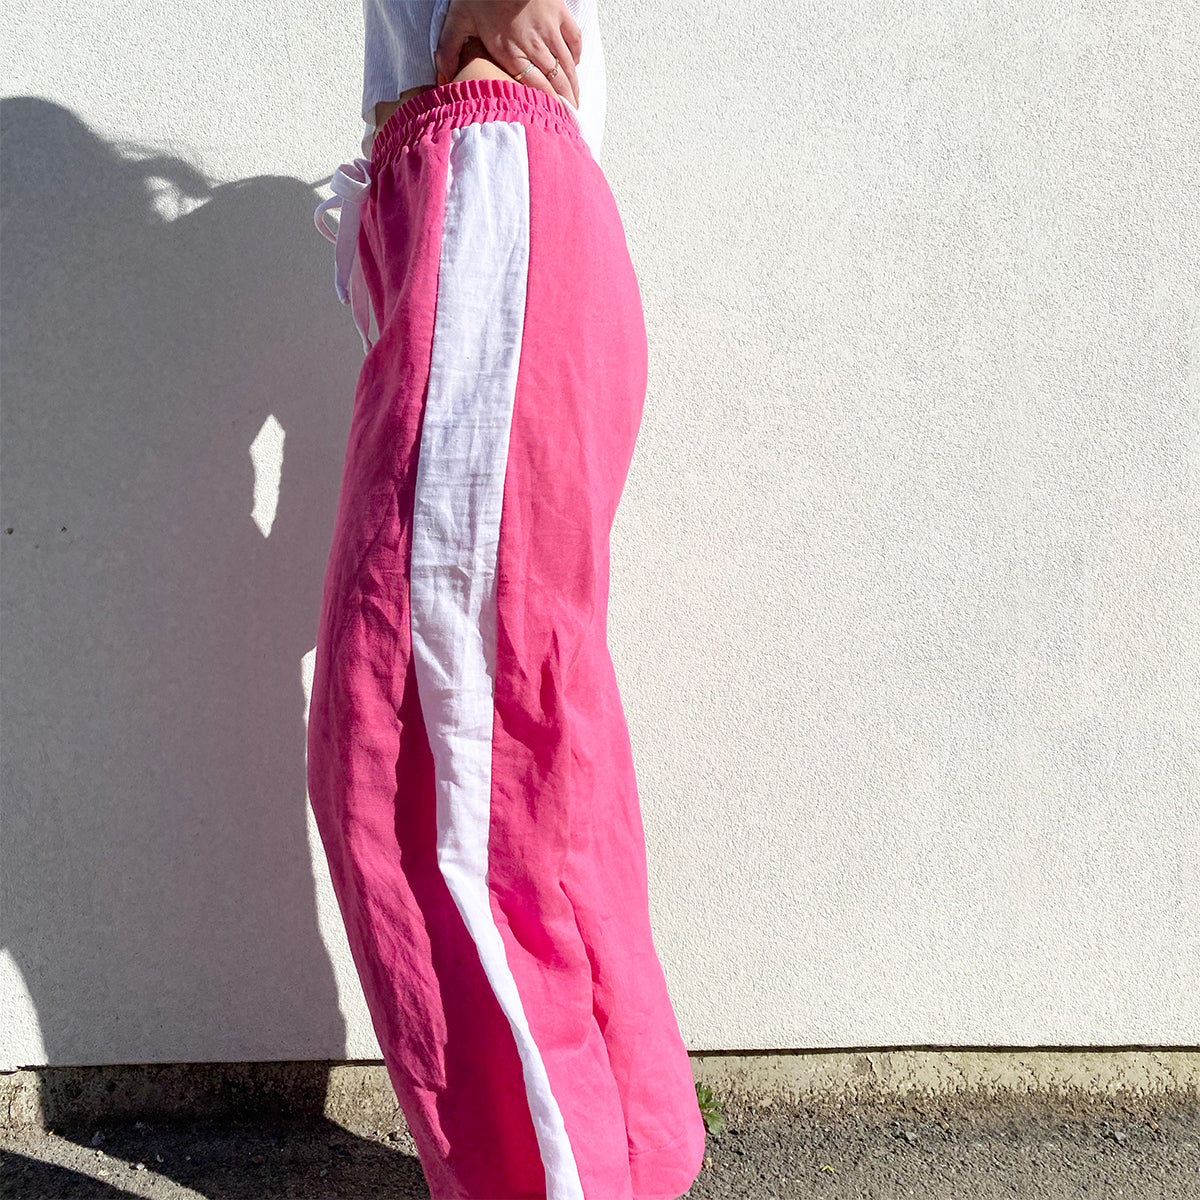 Stella Claire linen wide leg pants with a white stripe down the sides. New Zealand made.